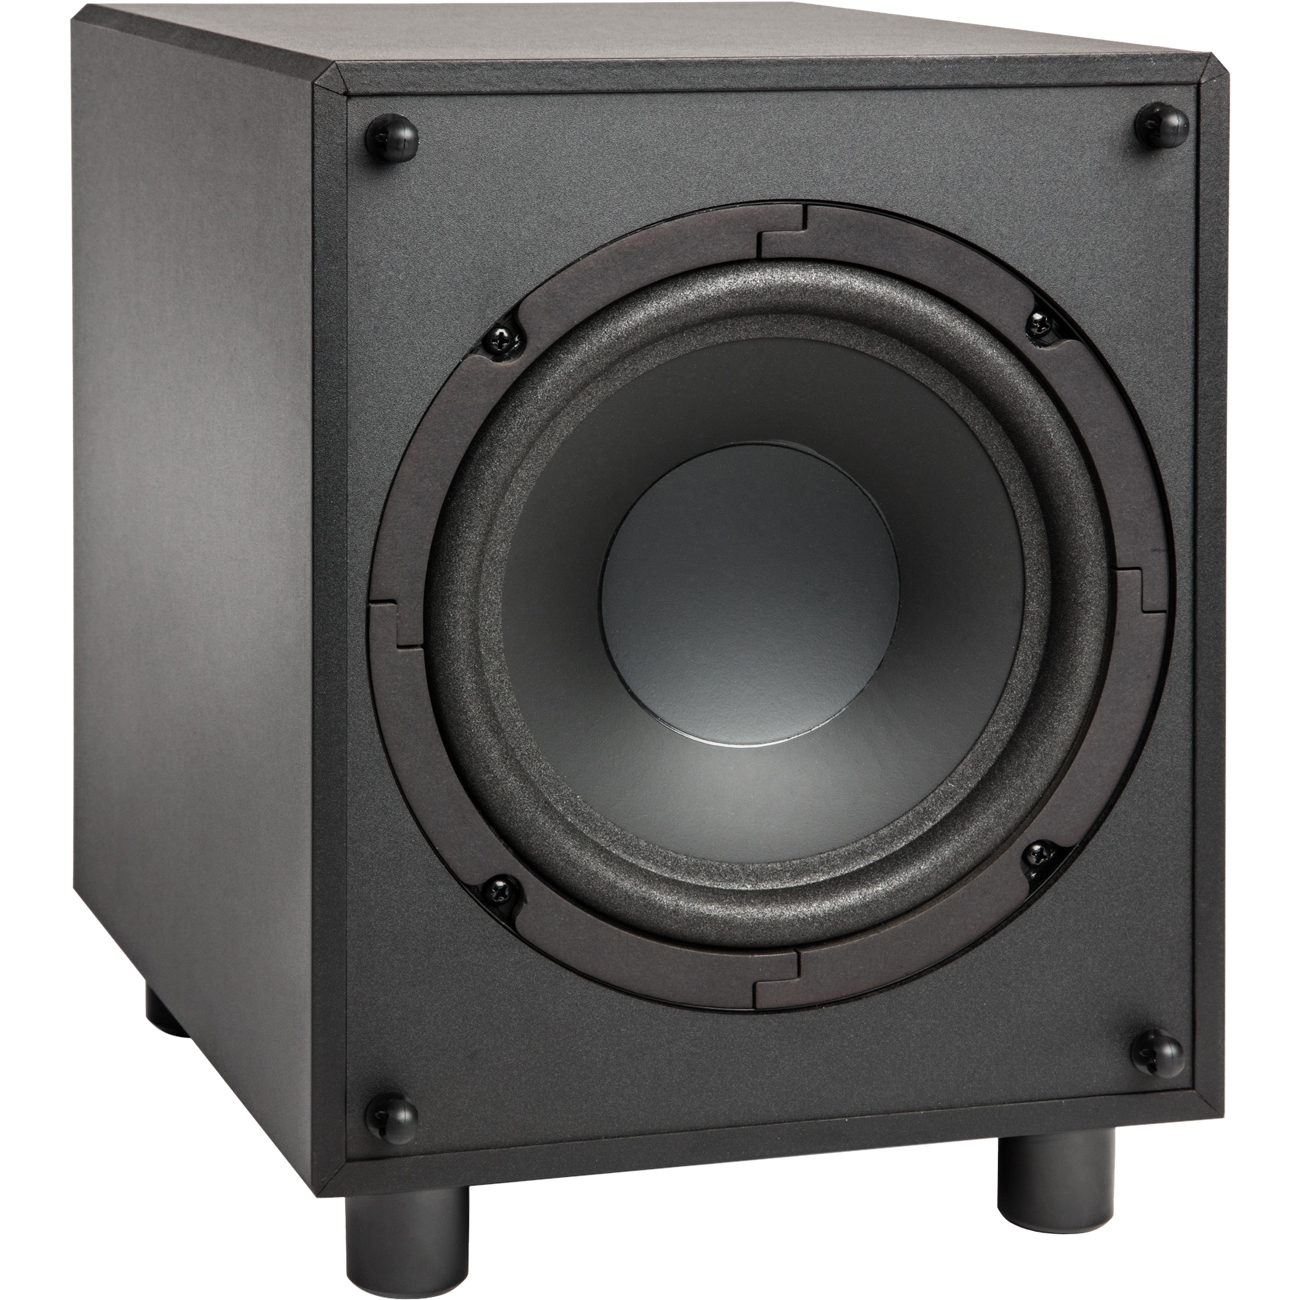 ProCinema Series 5.1 Channel High-Performance Compact Surround Sound System - image 5 of 17